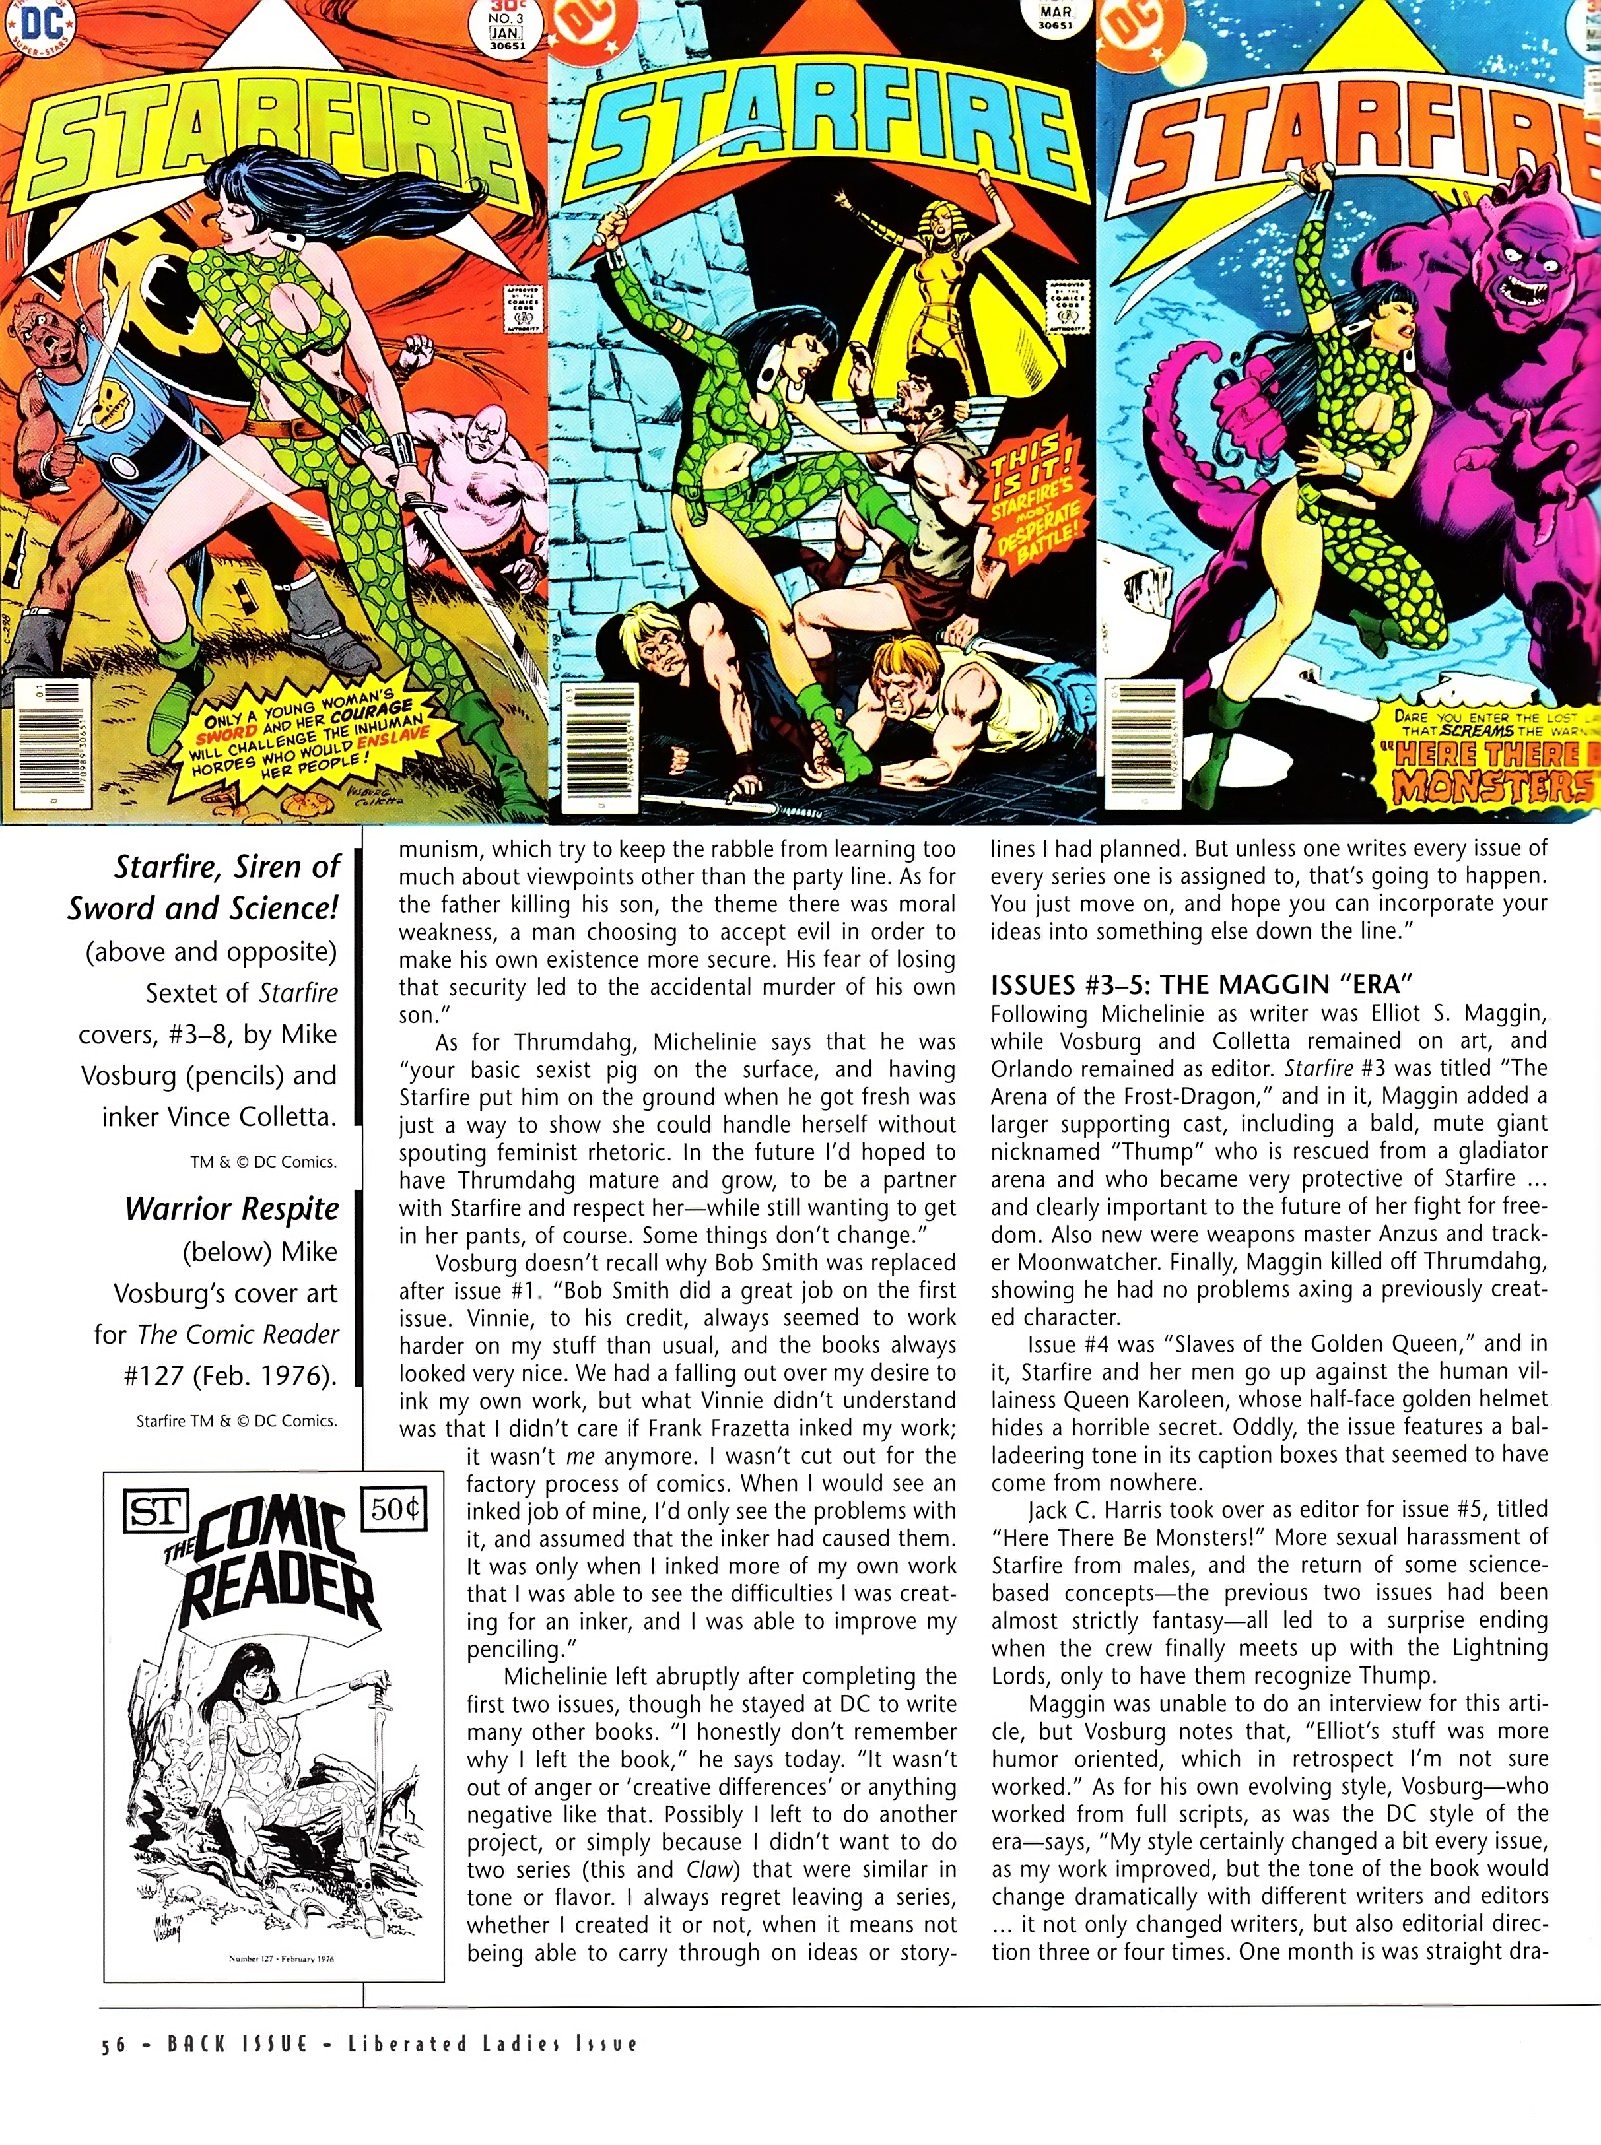 Read online Back Issue comic -  Issue #54 - 55